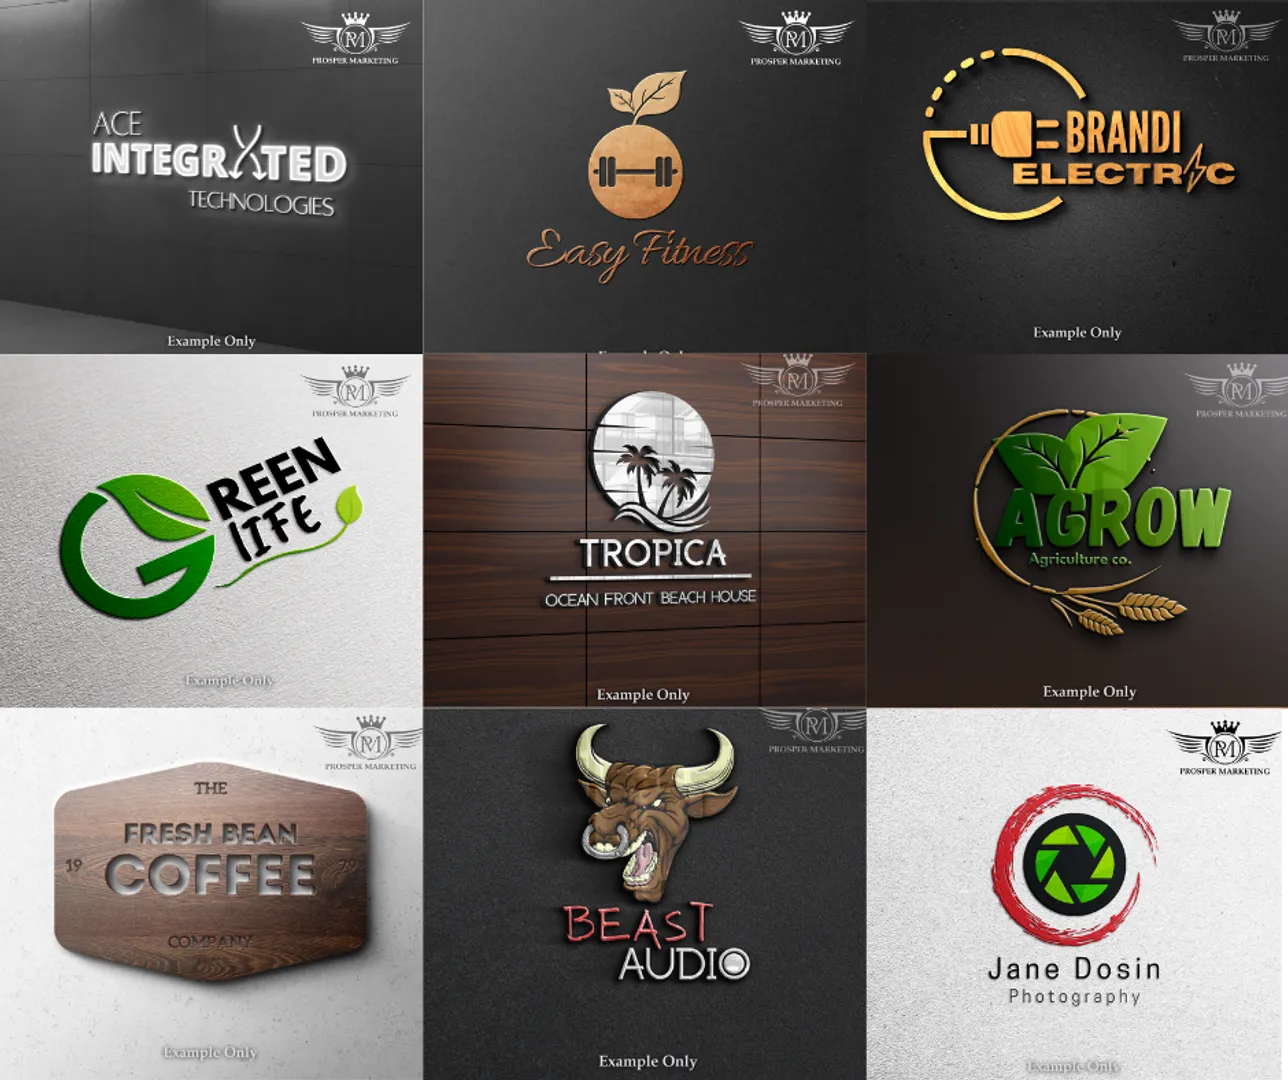 Ill be doing some logos again for the next few weeks while i get my marketing business back off the ground floor! 💪🔥

If you want to add some professional level palpability and flare to your company, Ill work with you personally to create a logo that reflects your brand and its values. 